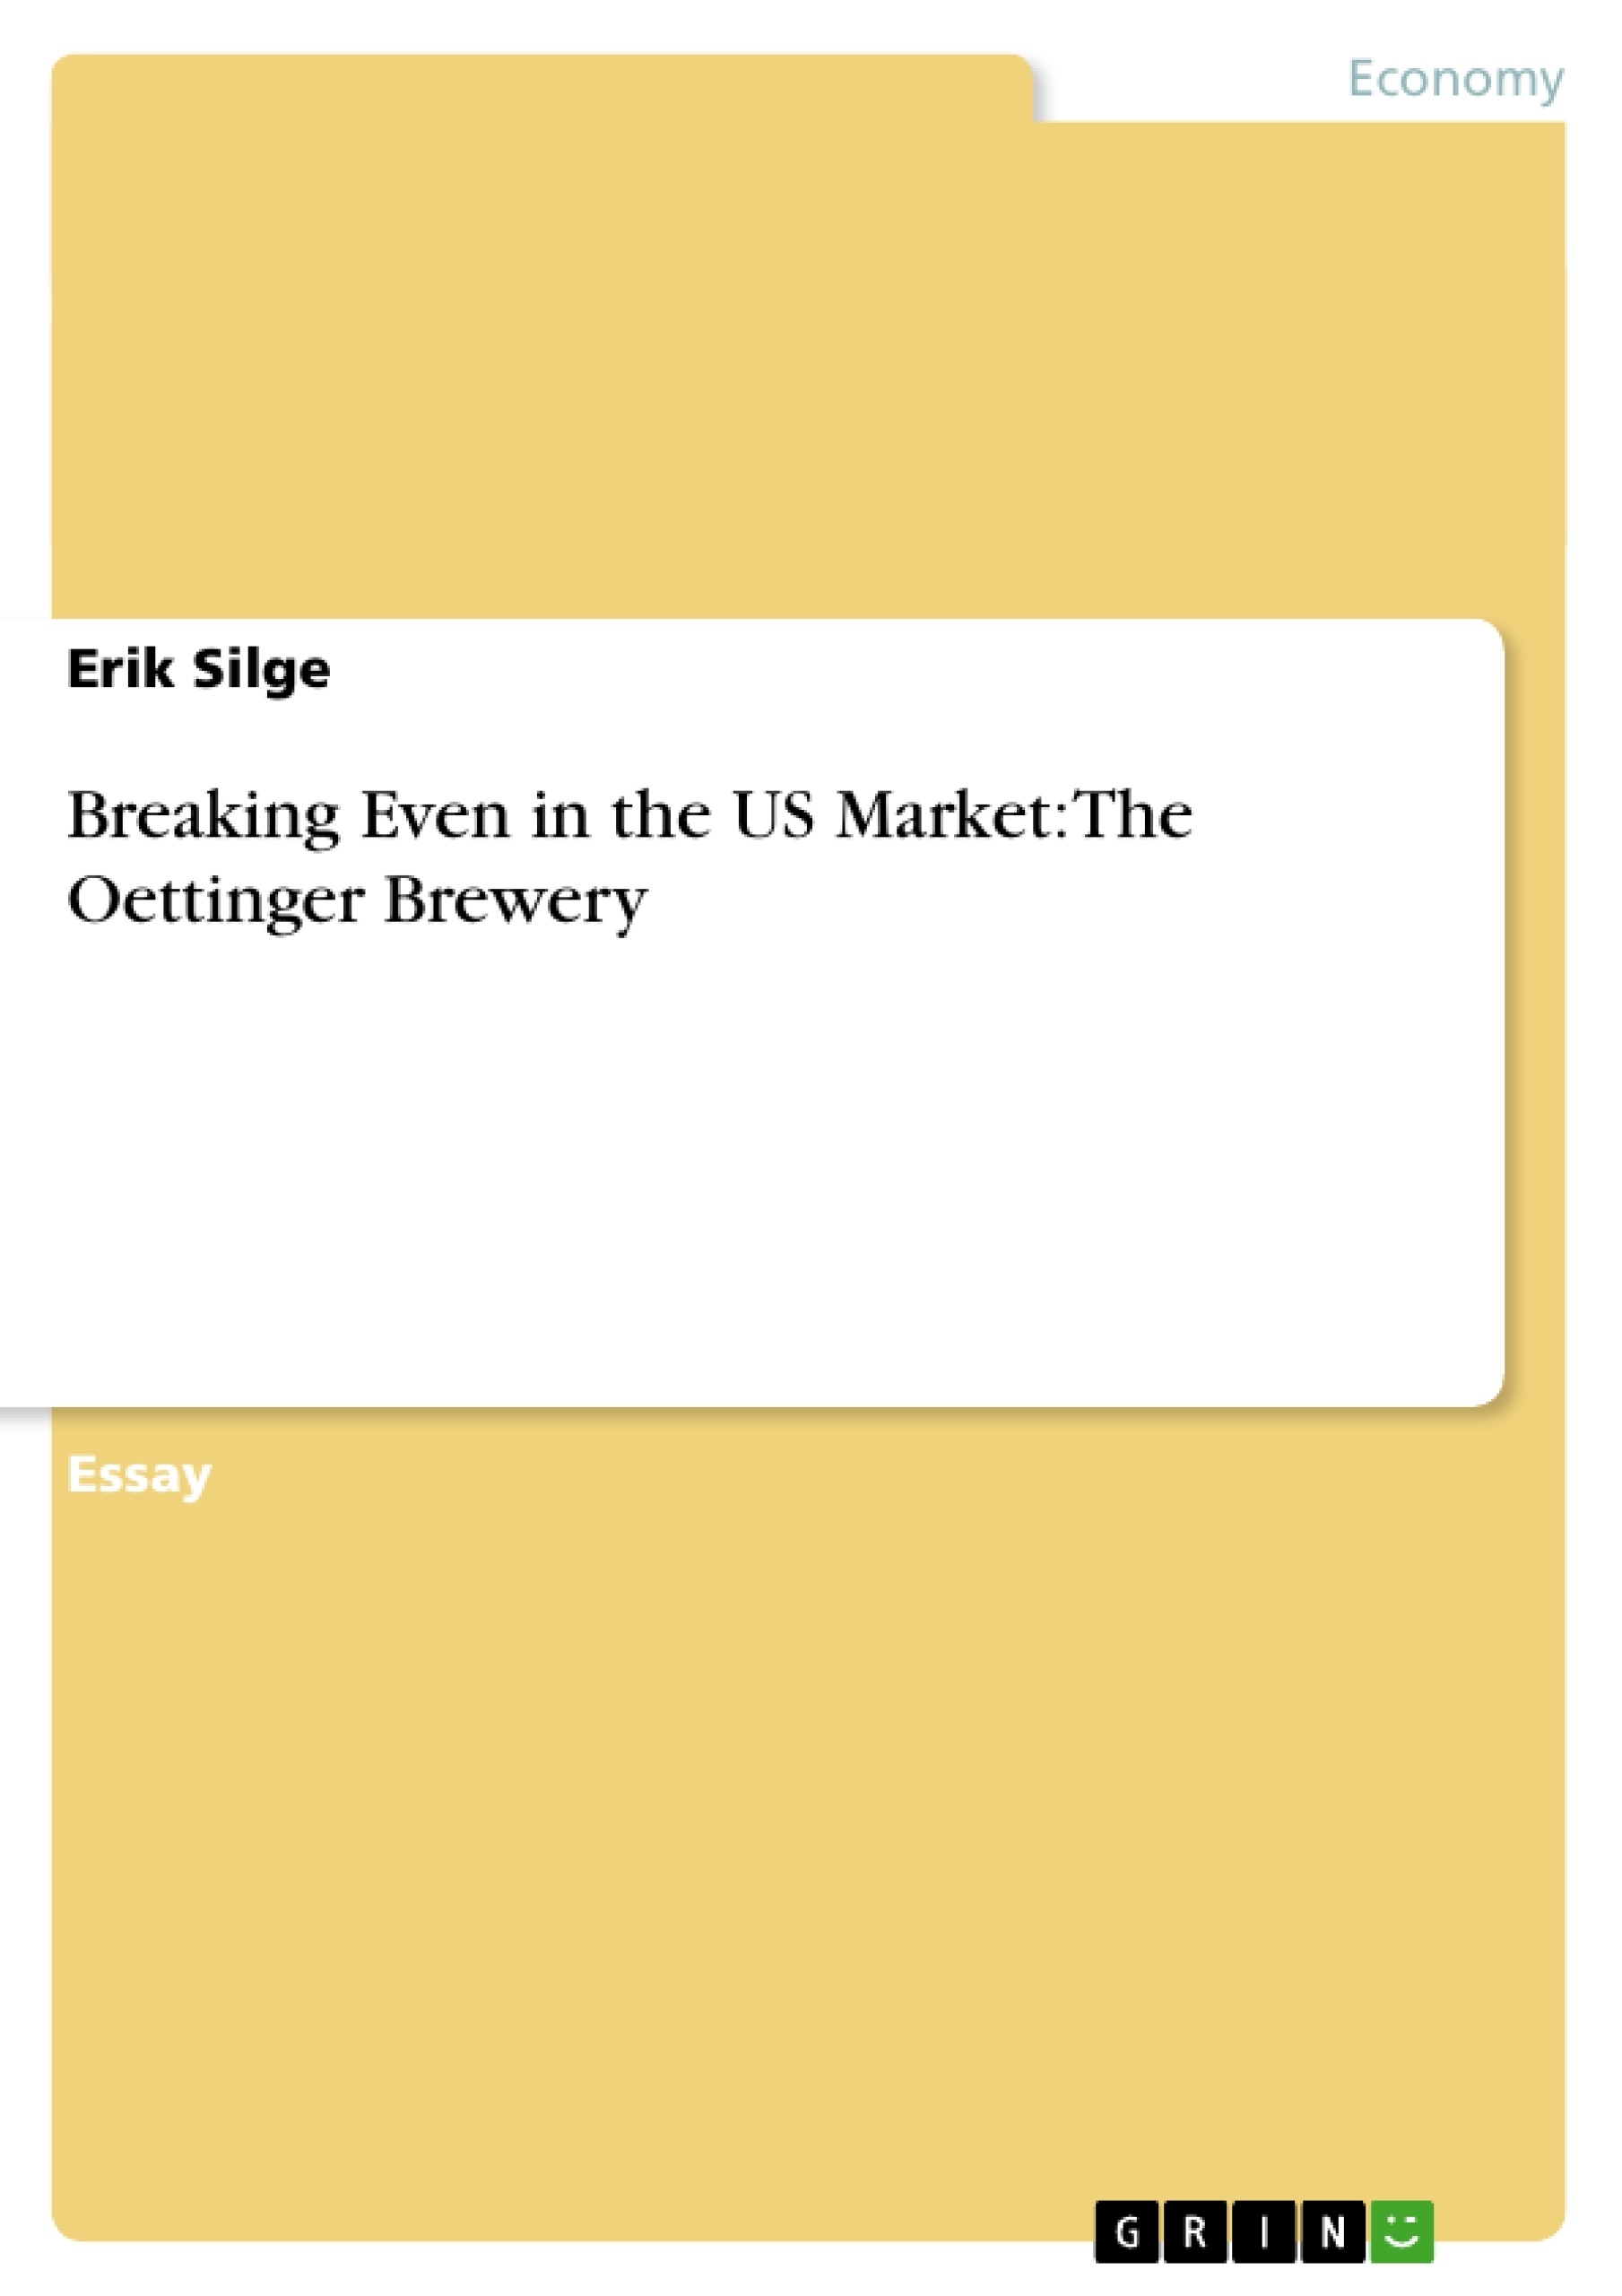 Titre: Breaking Even in the US Market: The Oettinger Brewery